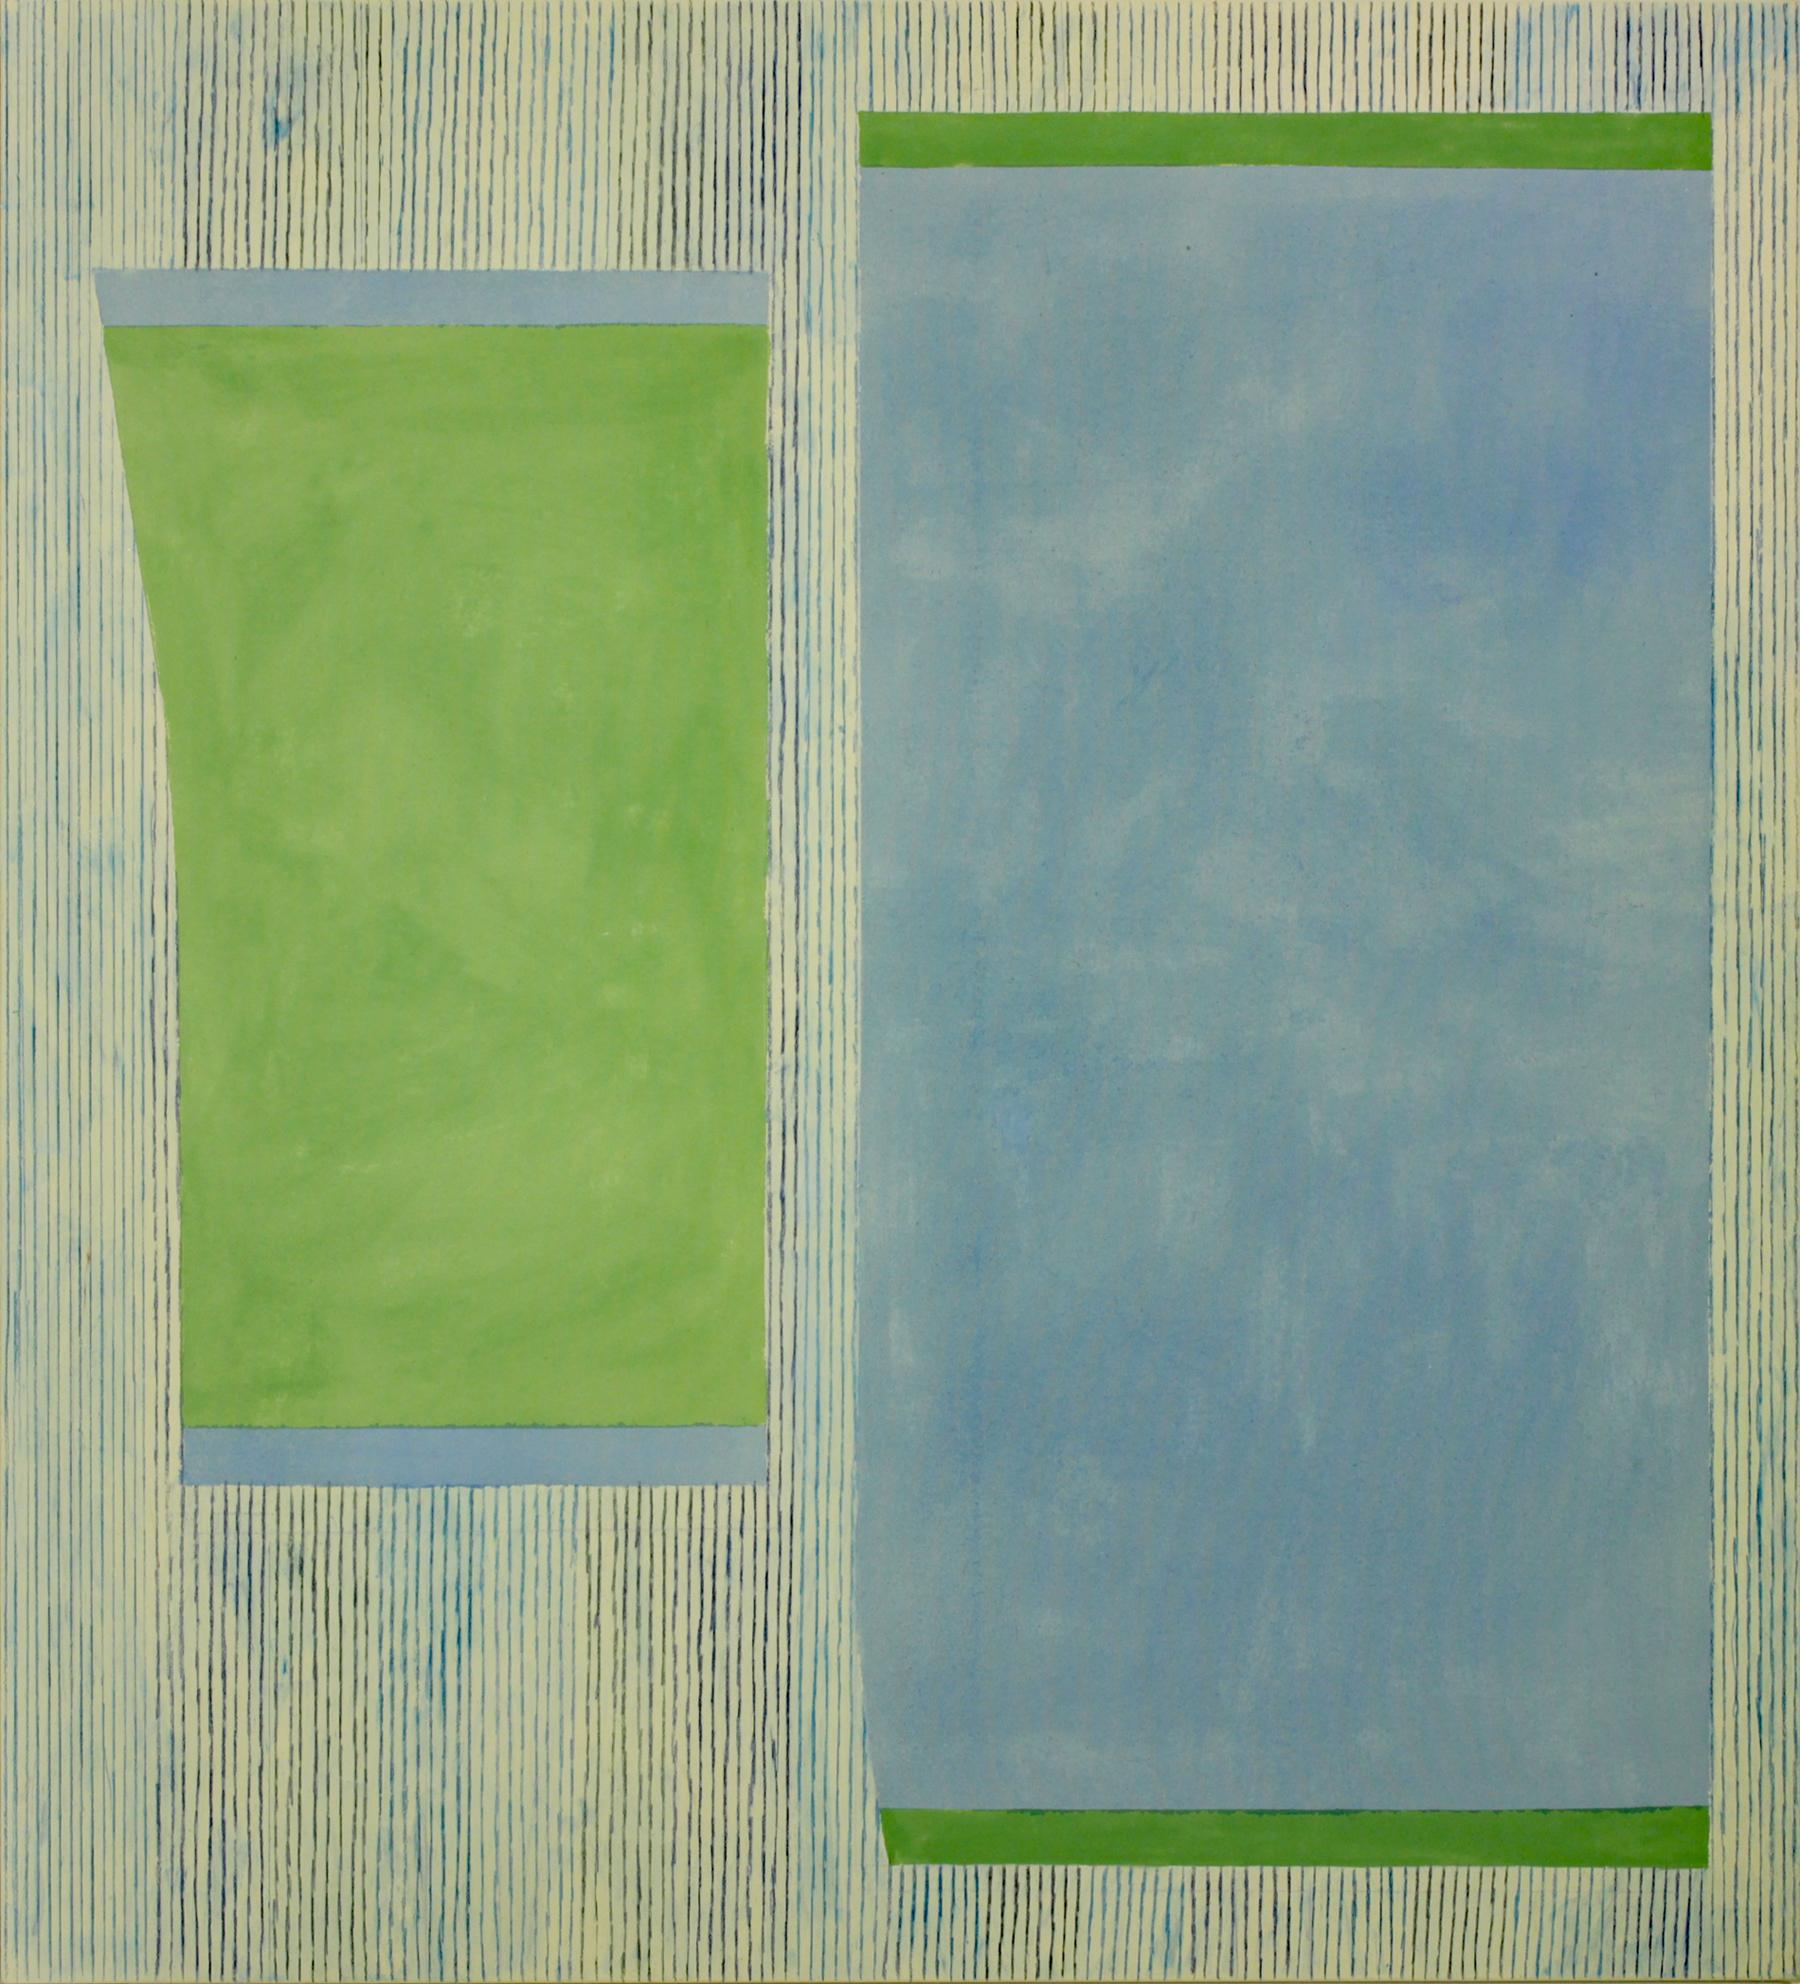 Clean and precise, carefully ordered blocks of color in light blue and light green are lively and vibrant while thin, delicate lines in blue and navy frame the shapes. Signed, dated and titled on verso.

Elizabeth Gourlay’s work is a meditation on